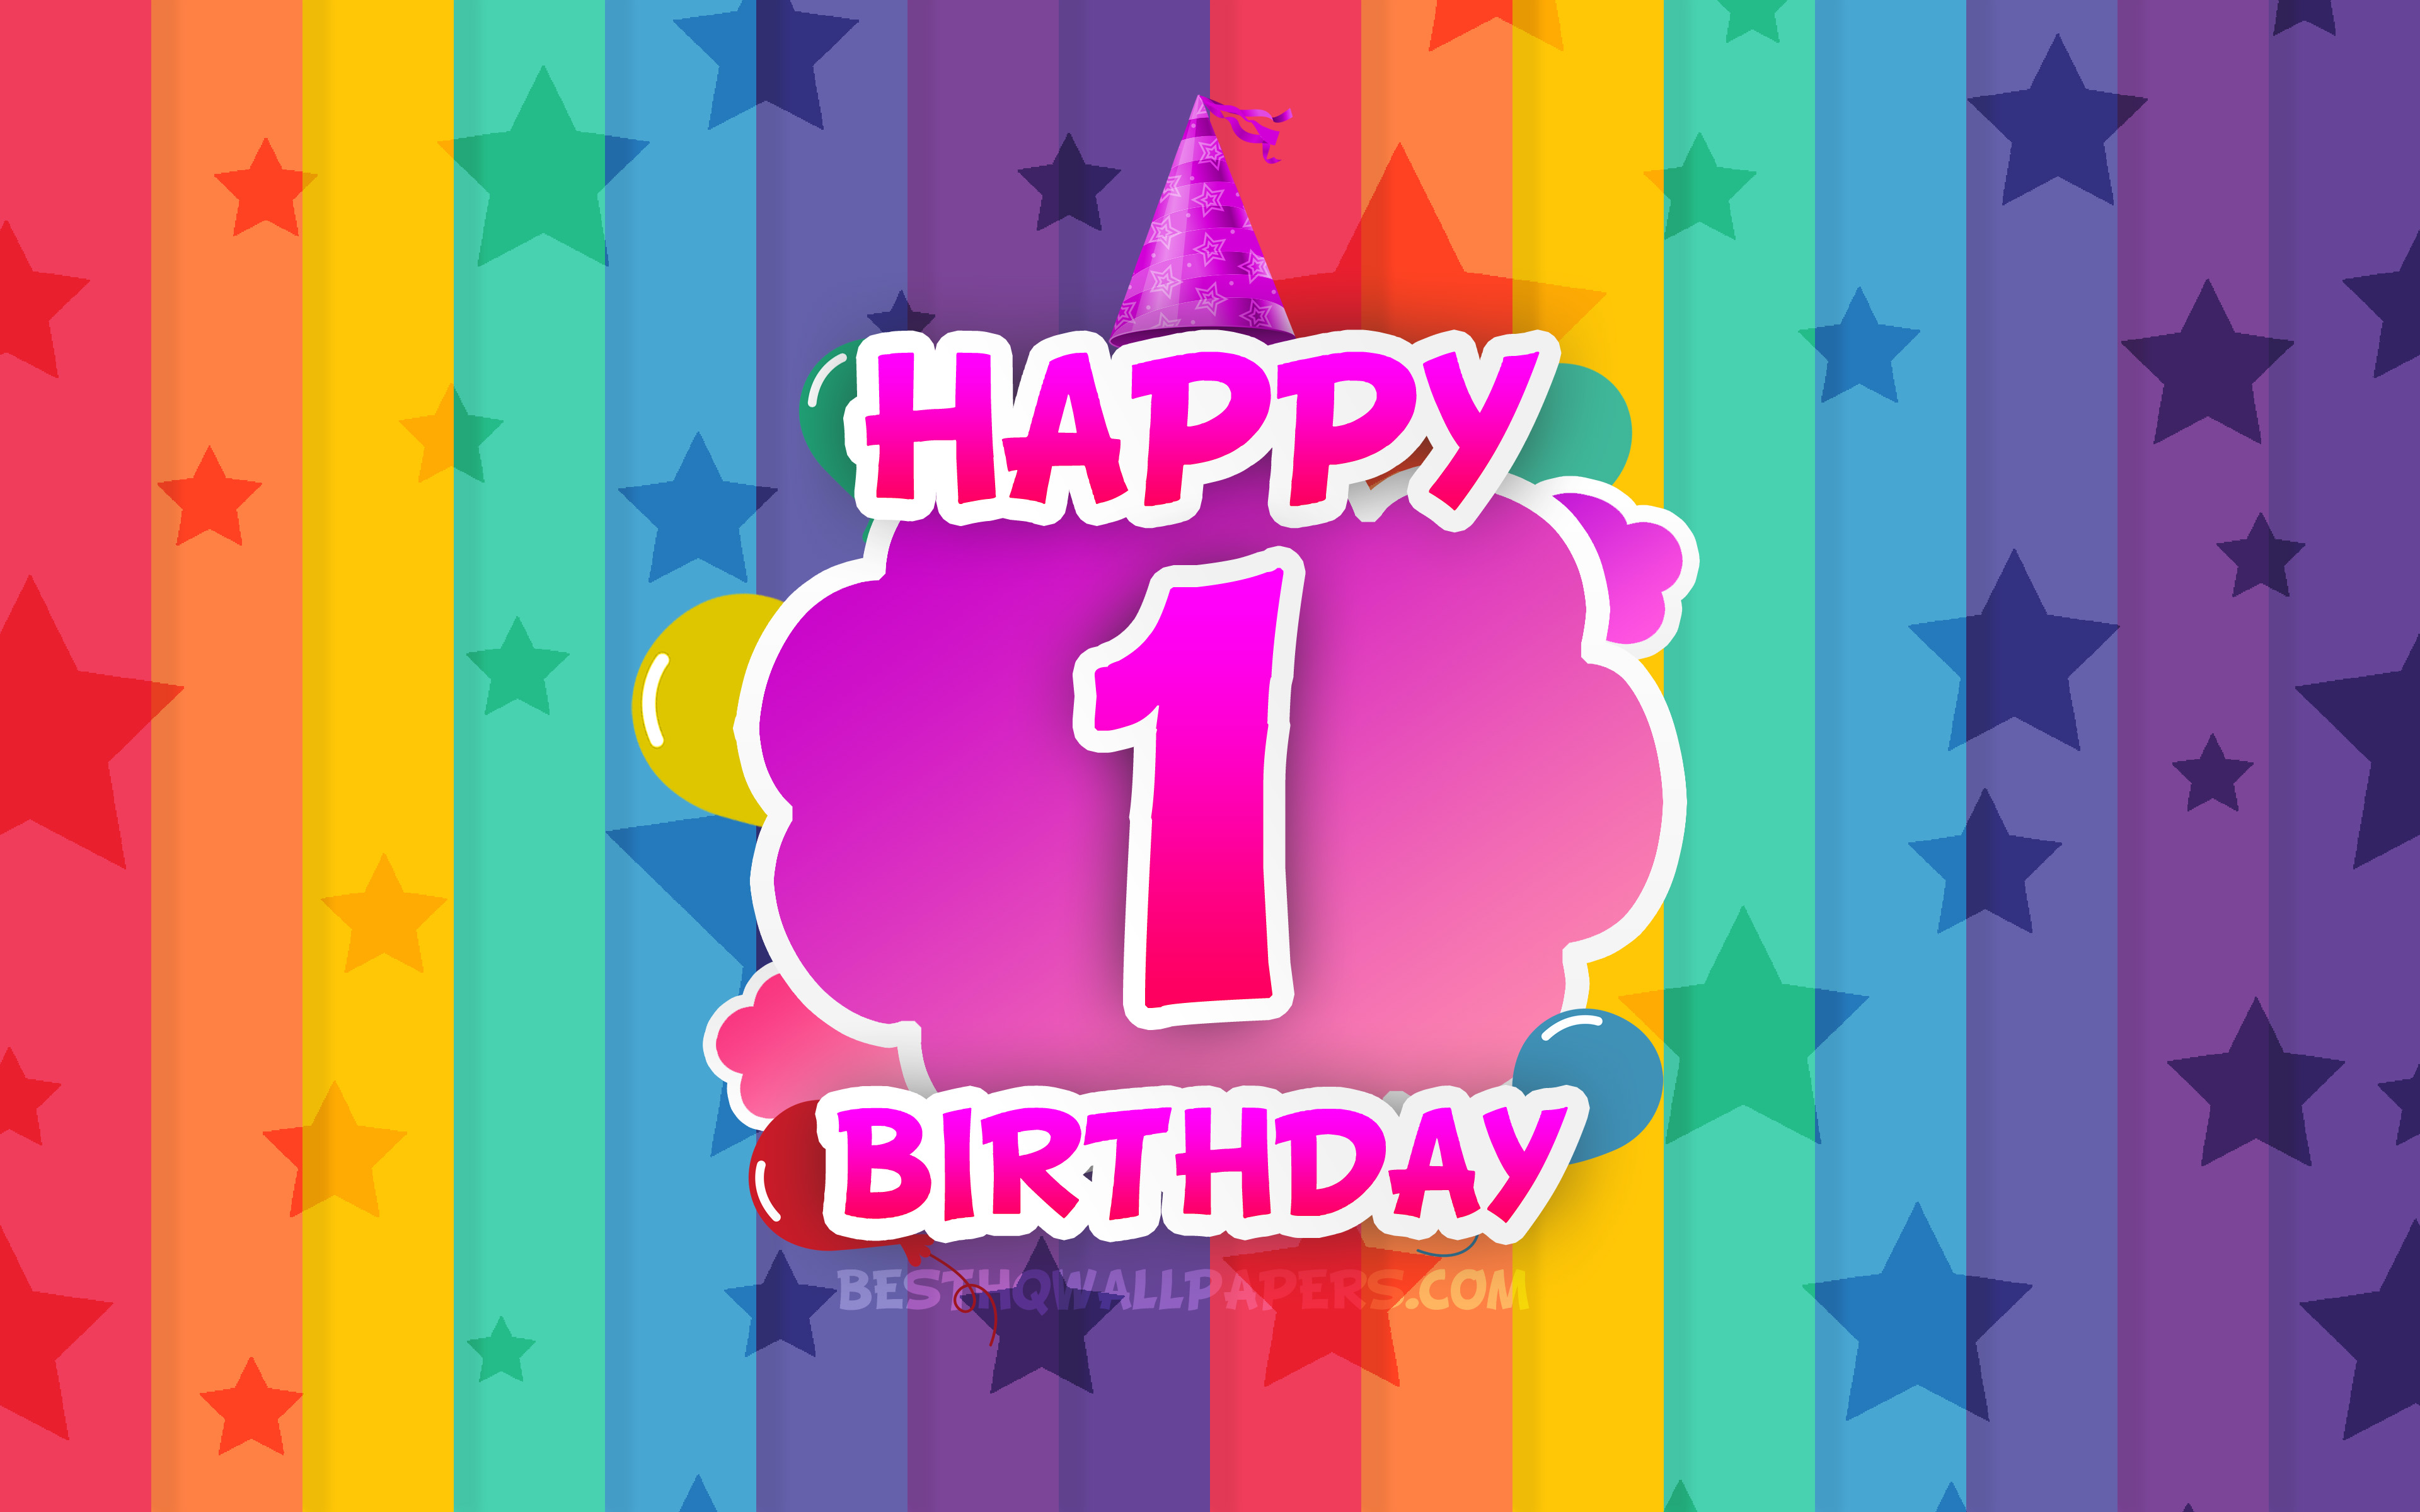 Download wallpaper Happy 1st birthday, colorful clouds, 4k, Birthday concept, rainbow background, Happy 1 Years Birthday, creative 3D letters, 1st Birthday, Birthday Party, 1st Birthday Party for desktop with resolution 3840x2400. High